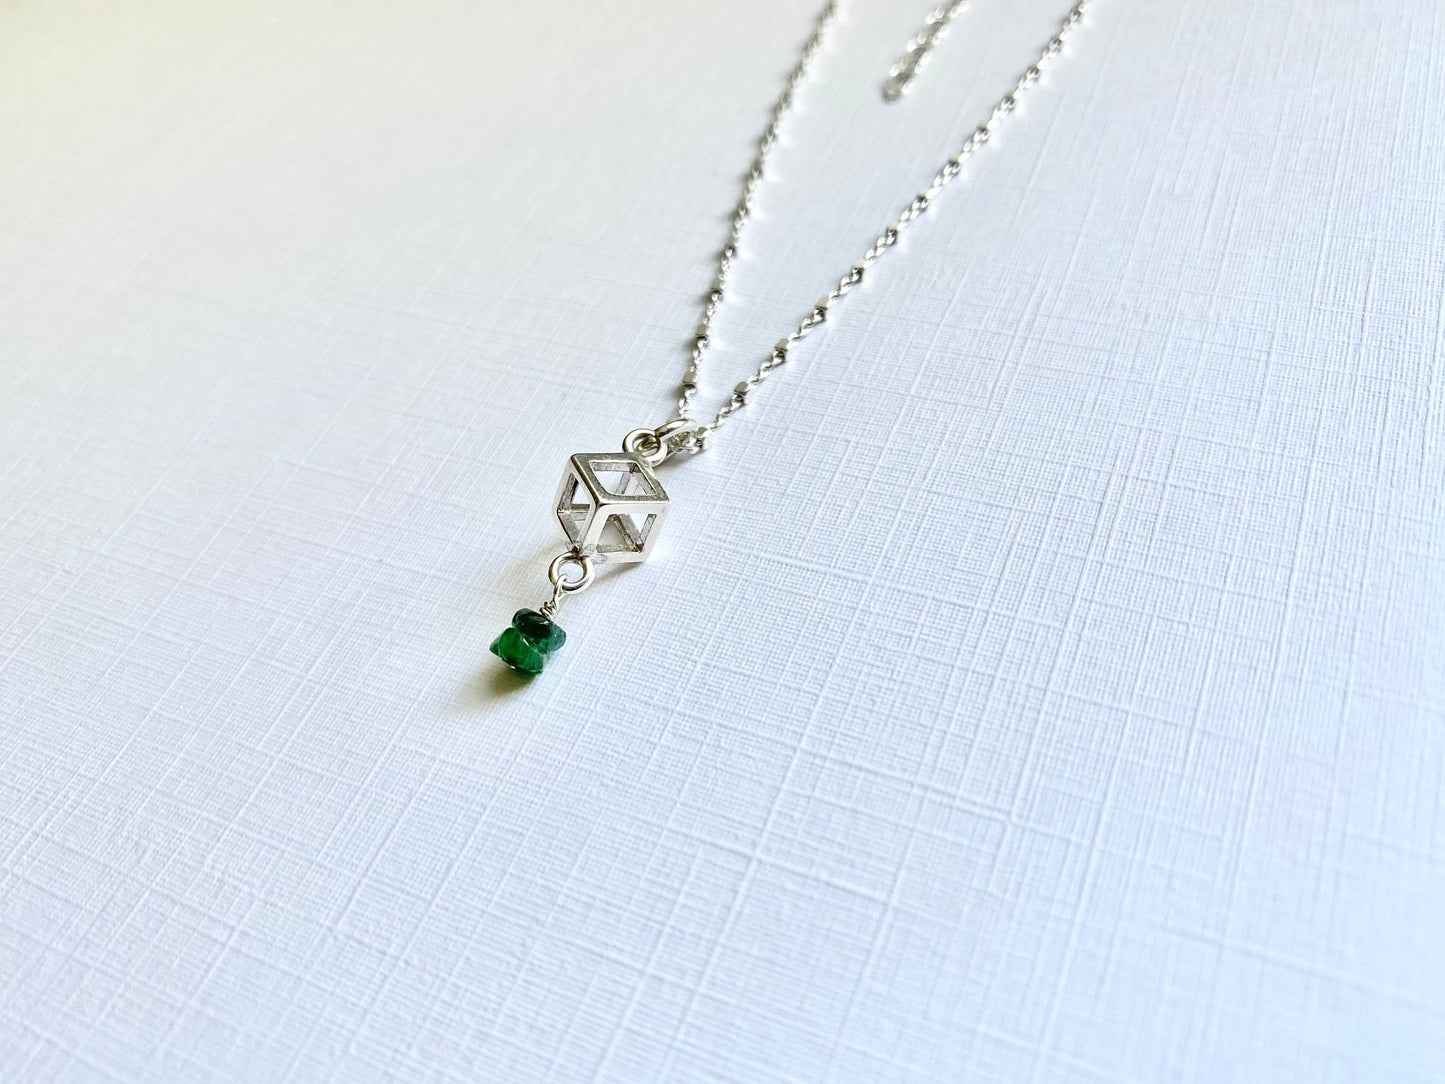 Free Thinker ~ Emerald Cube ~ Sterling Silver and Emerald Adjustable Charm Necklace - Sacred Symbols Series